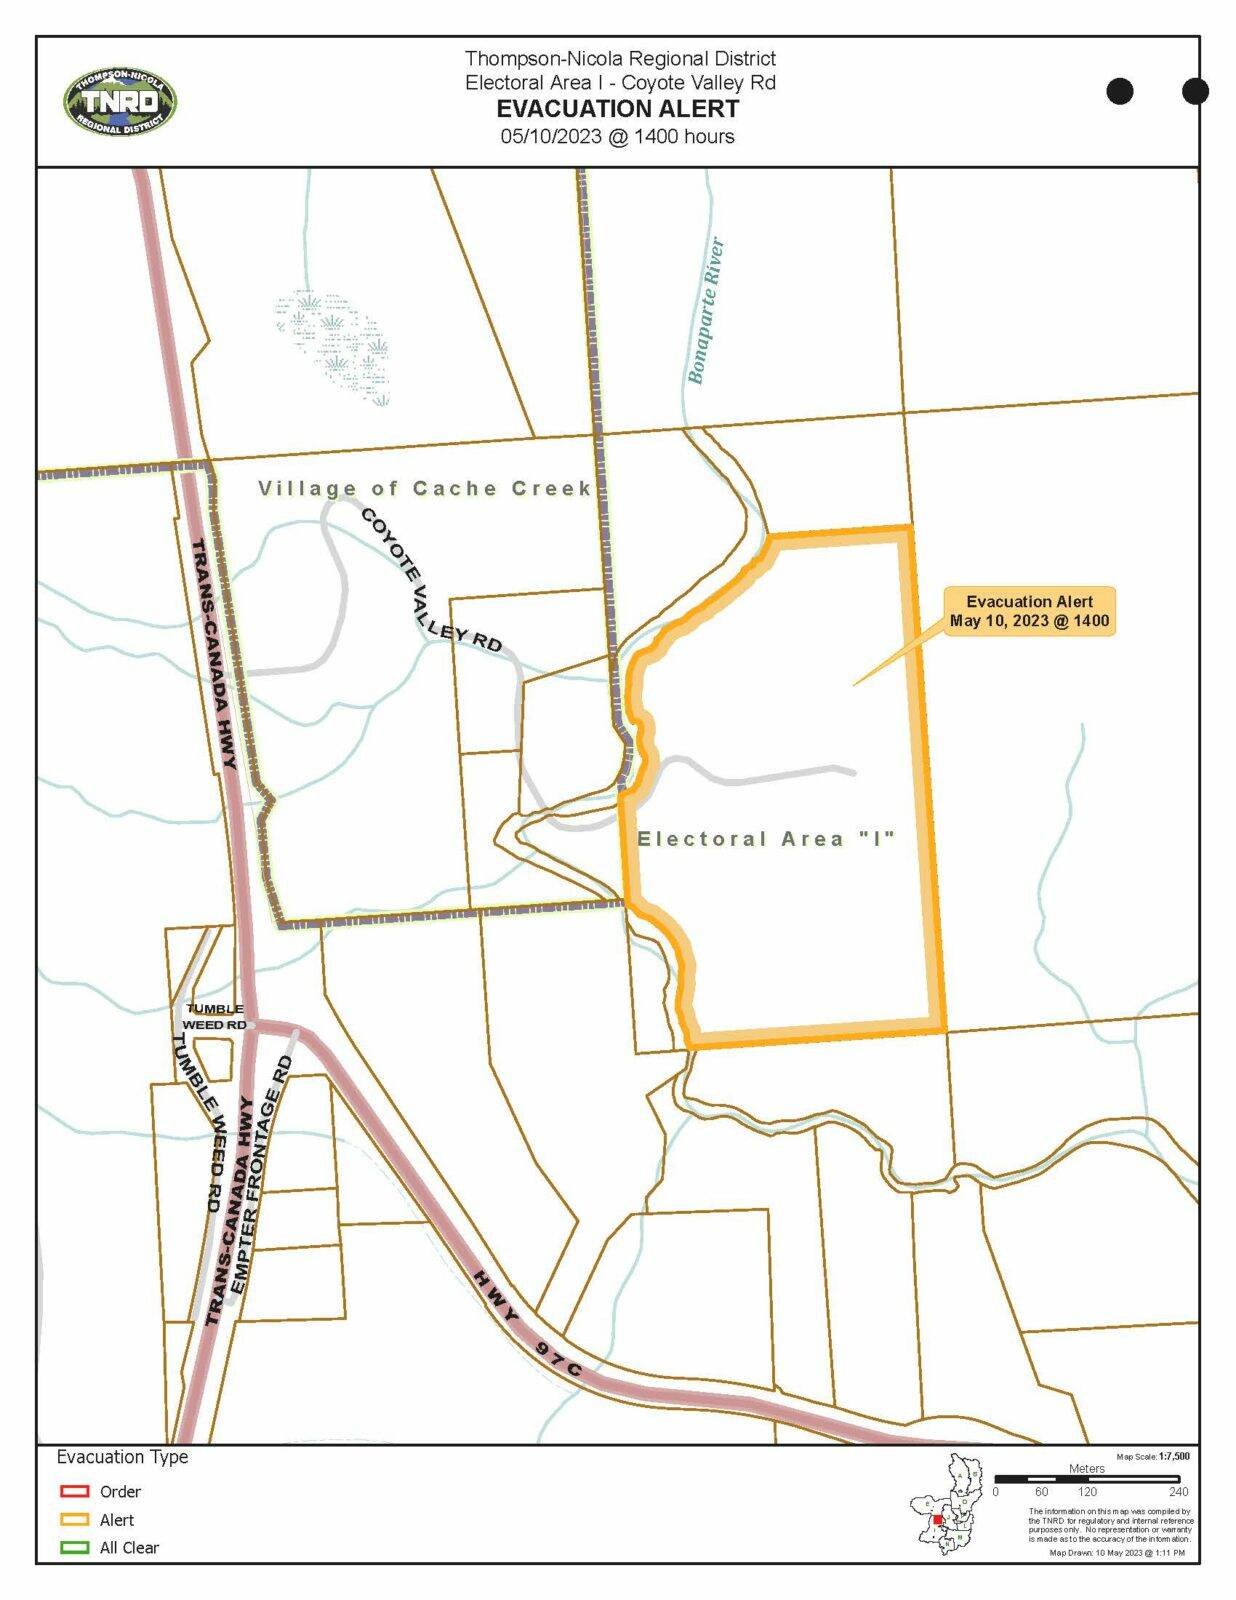 A current flooding event in Electoral Area “I” (Blue Sky Country”) poses a threat to life and property for one address at 1400 Coyote Valley Road, as well as other areas in area “I”.